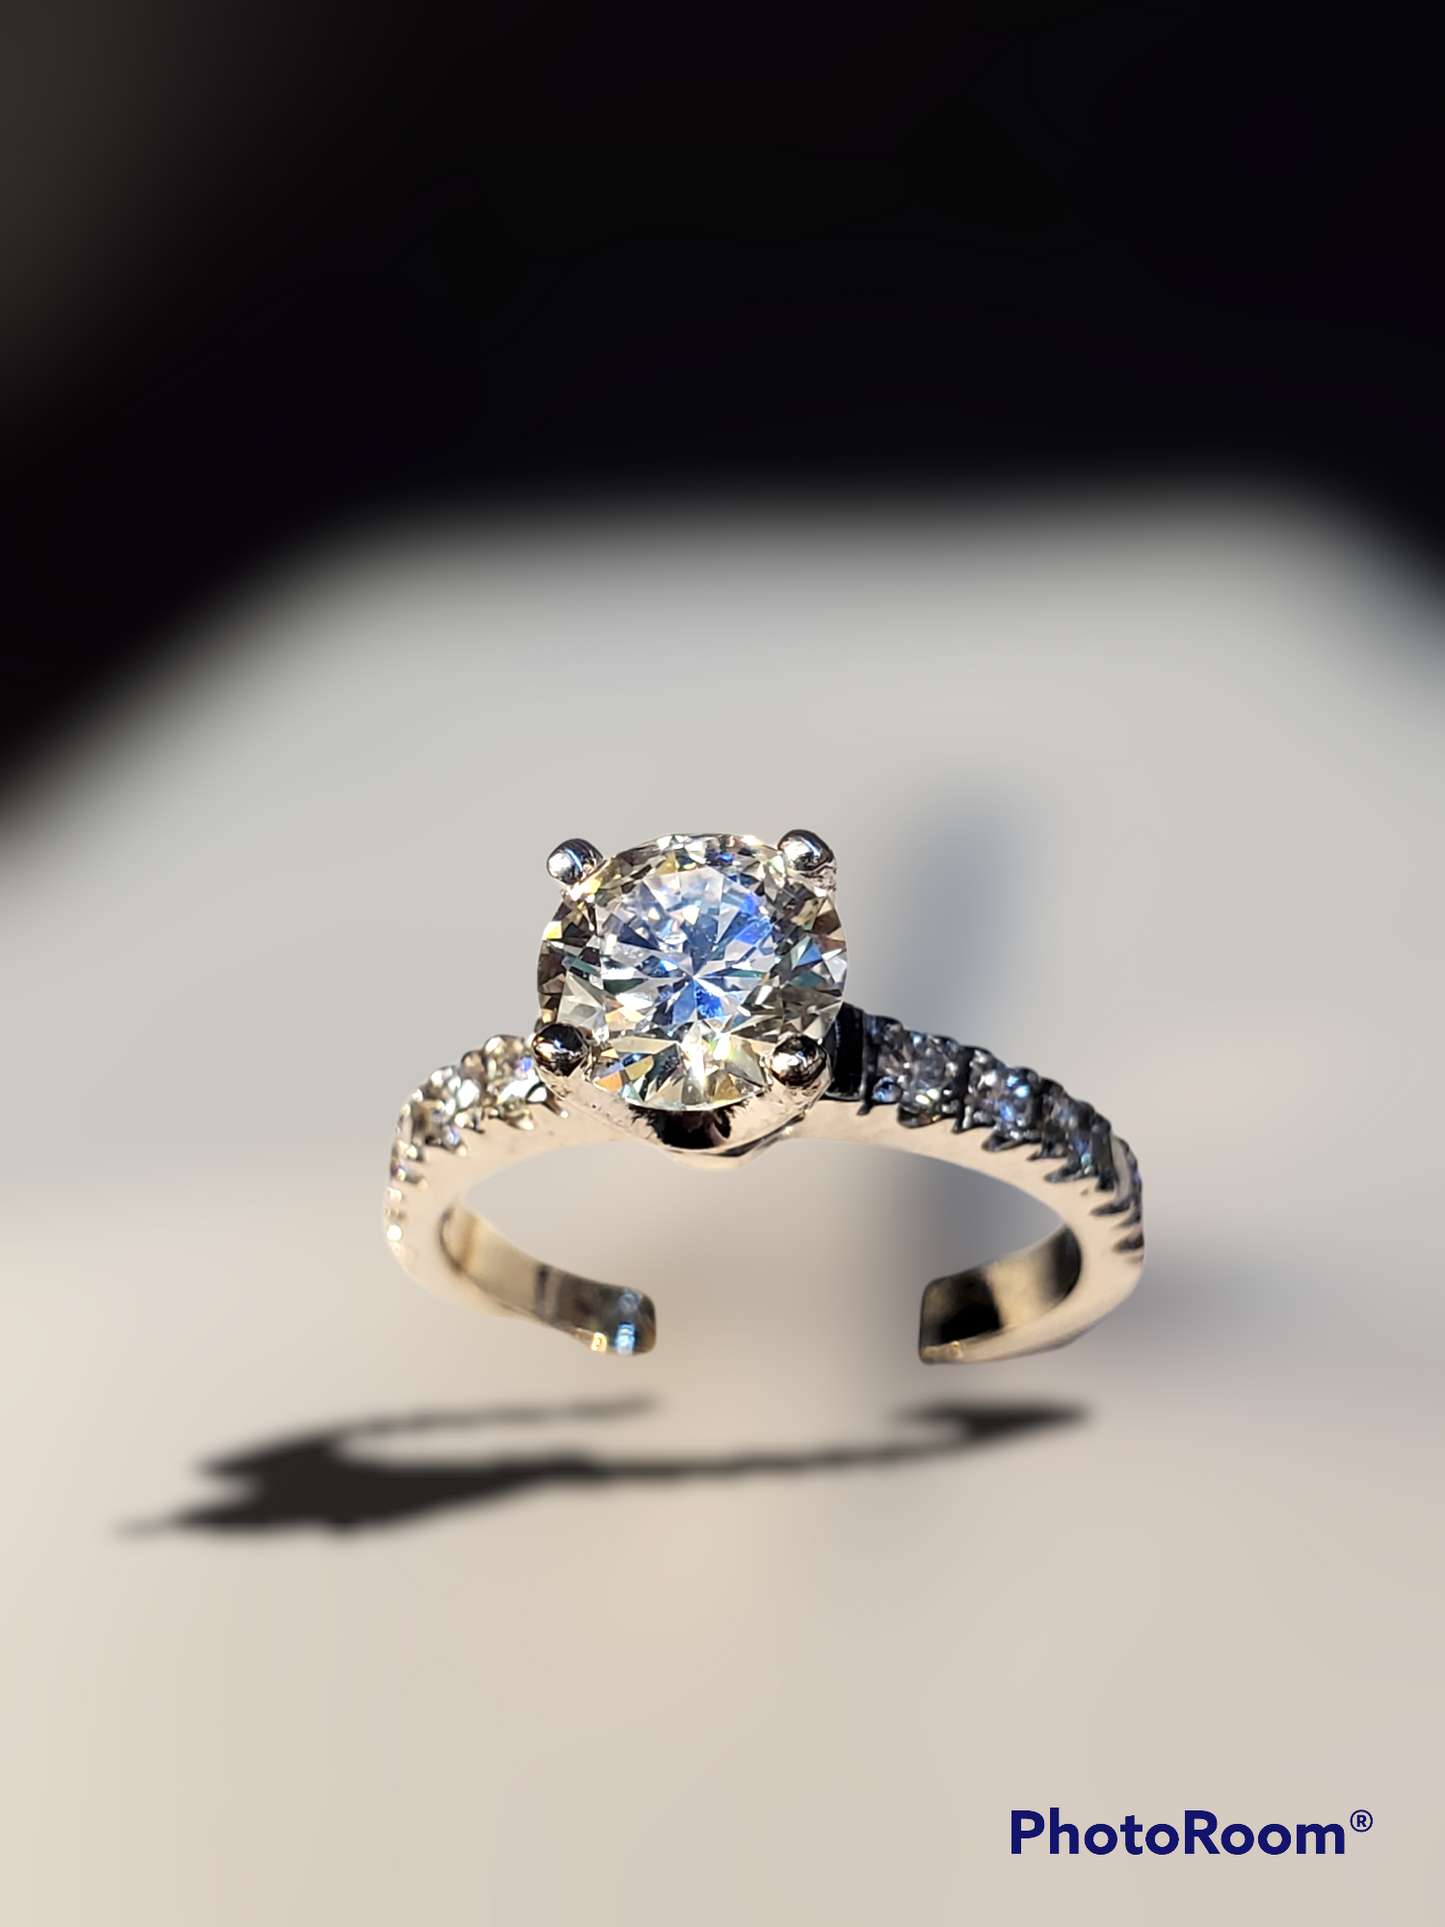 4851 lab grown diamond engagement ring appraised at $7500 purchase price $4000